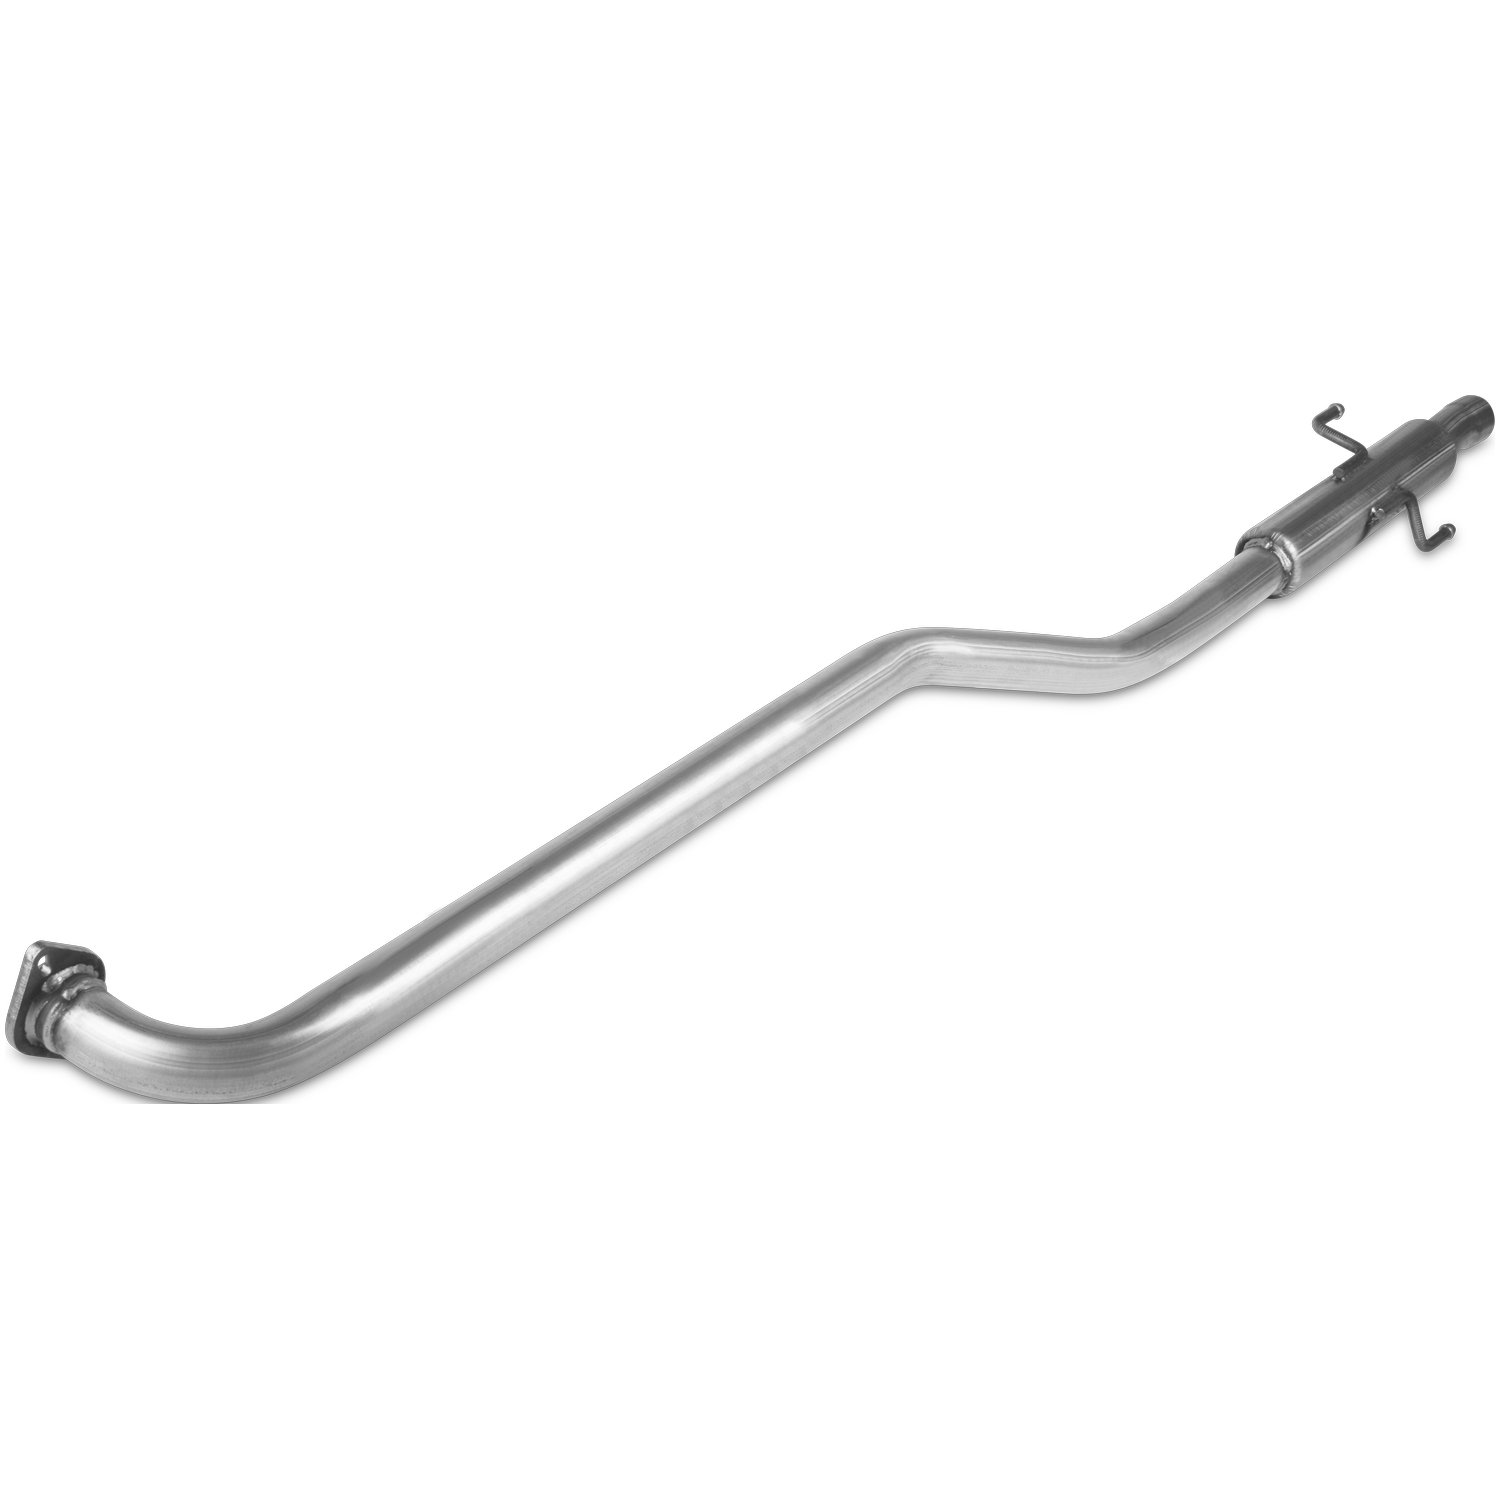 Direct-Fit Exhaust Resonator and Pipe Assembly, 1998-2002 Toyota Corolla, Geo Prizm 1.8L